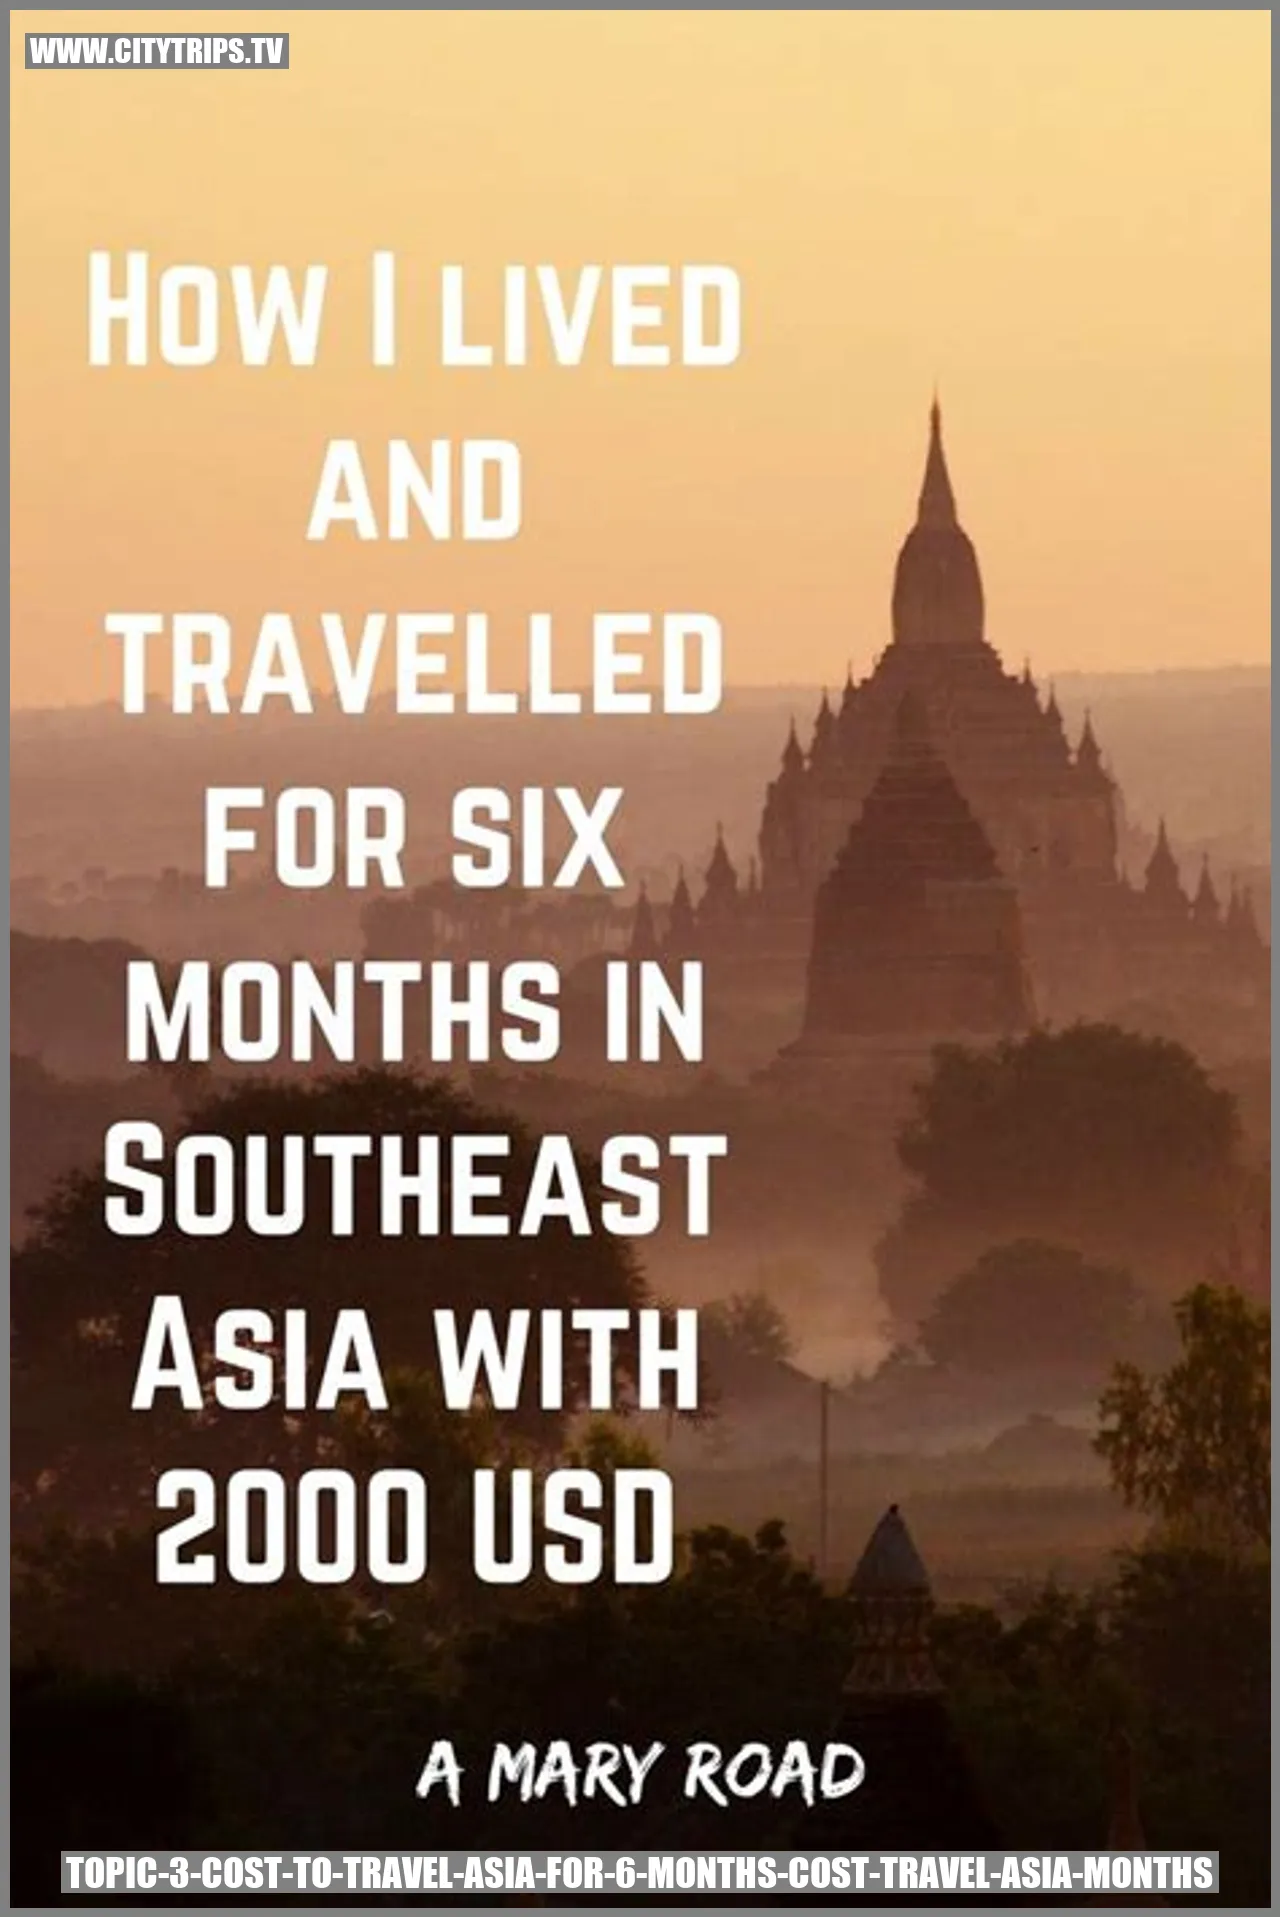 Cost to Travel Asia for 6 Months